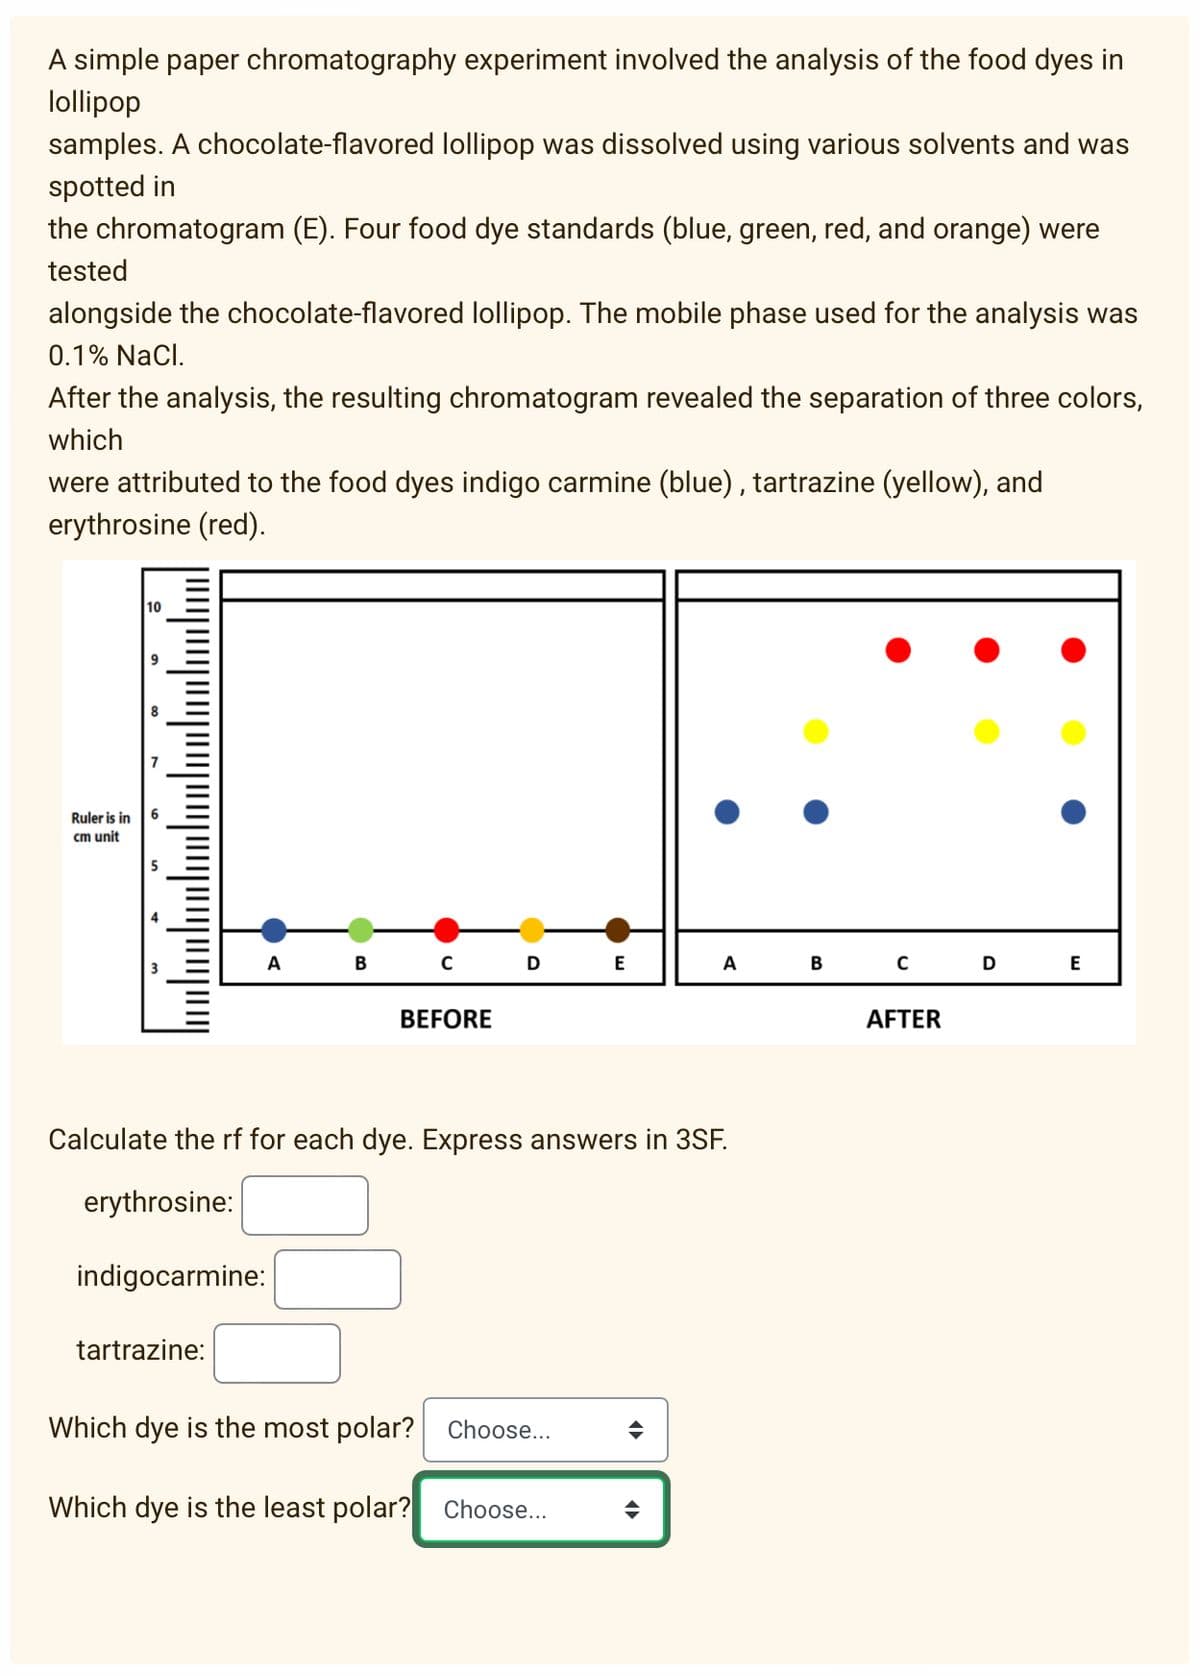 A simple paper chromatography experiment involved the analysis of the food dyes in
lollipop
samples. A chocolate-flavored lollipop was dissolved using various solvents and was
spotted in
the chromatogram (E). Four food dye standards (blue, green, red, and orange) were
tested
alongside the chocolate-flavored lollipop. The mobile phase used for the analysis was
0.1% NaCl.
After the analysis, the resulting chromatogram revealed the separation of three colors,
which
were attributed to the food dyes indigo carmine (blue), tartrazine (yellow), and
erythrosine (red).
10
Ruler is in
cm unit
в с
B C D
A
E
A
E
BEFORE
AFTER
Calculate the rf for each dye. Express answers in 3SF.
erythrosine:
indigocarmine:
tartrazine:
Which dye is the most polar? Choose..
Which dye is the least polar? Choose...
